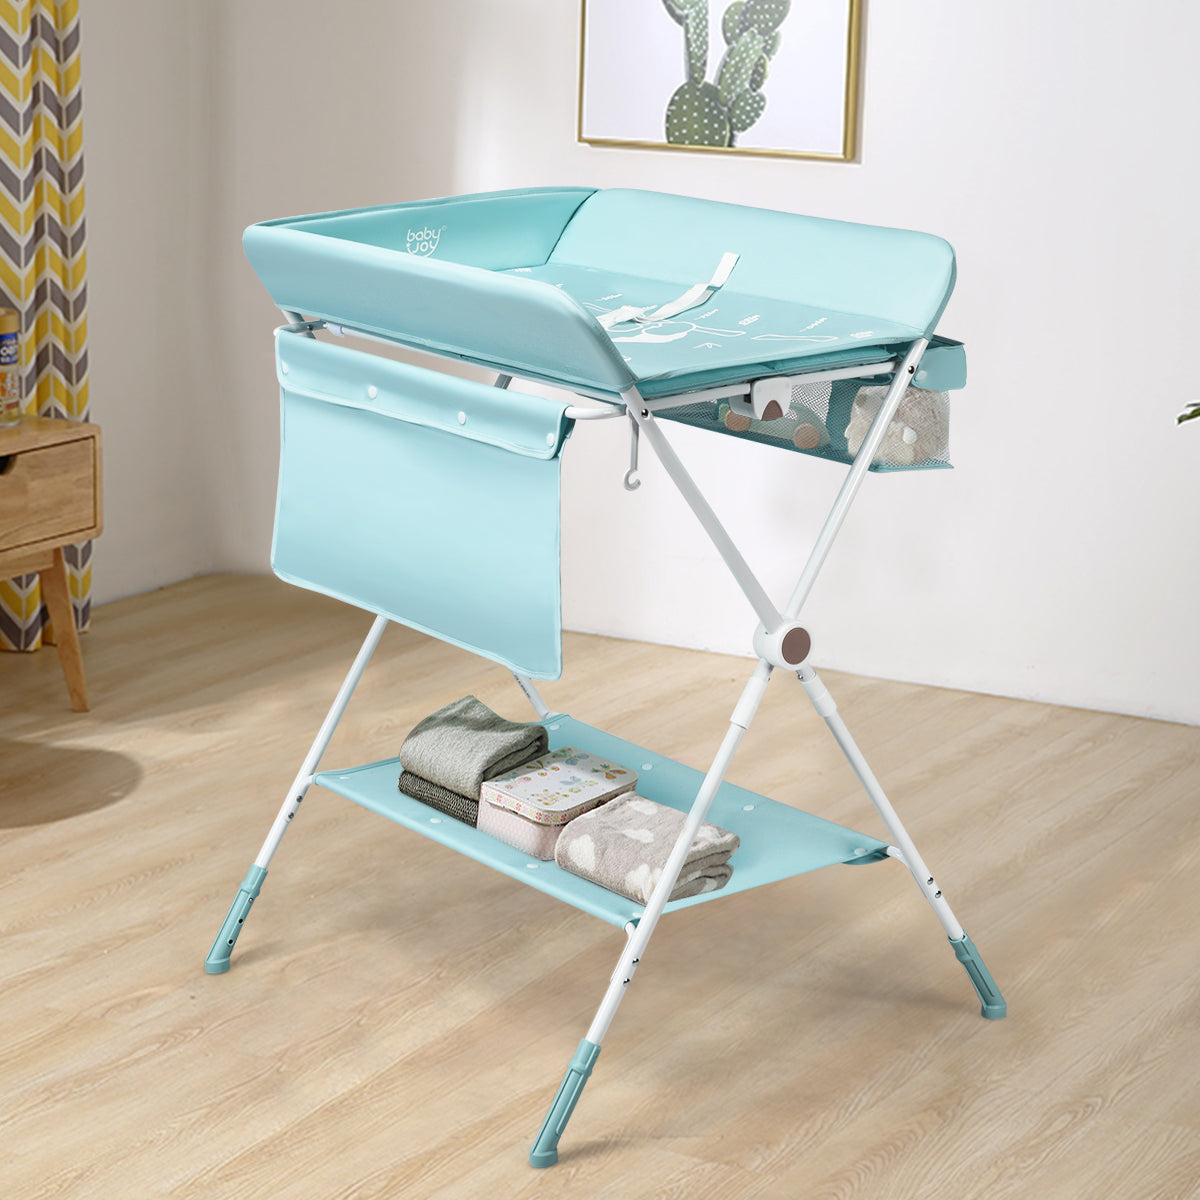 Portable Multi purpose Diaper Station with Storage Rack and Adjustable Heights for Kids Blue